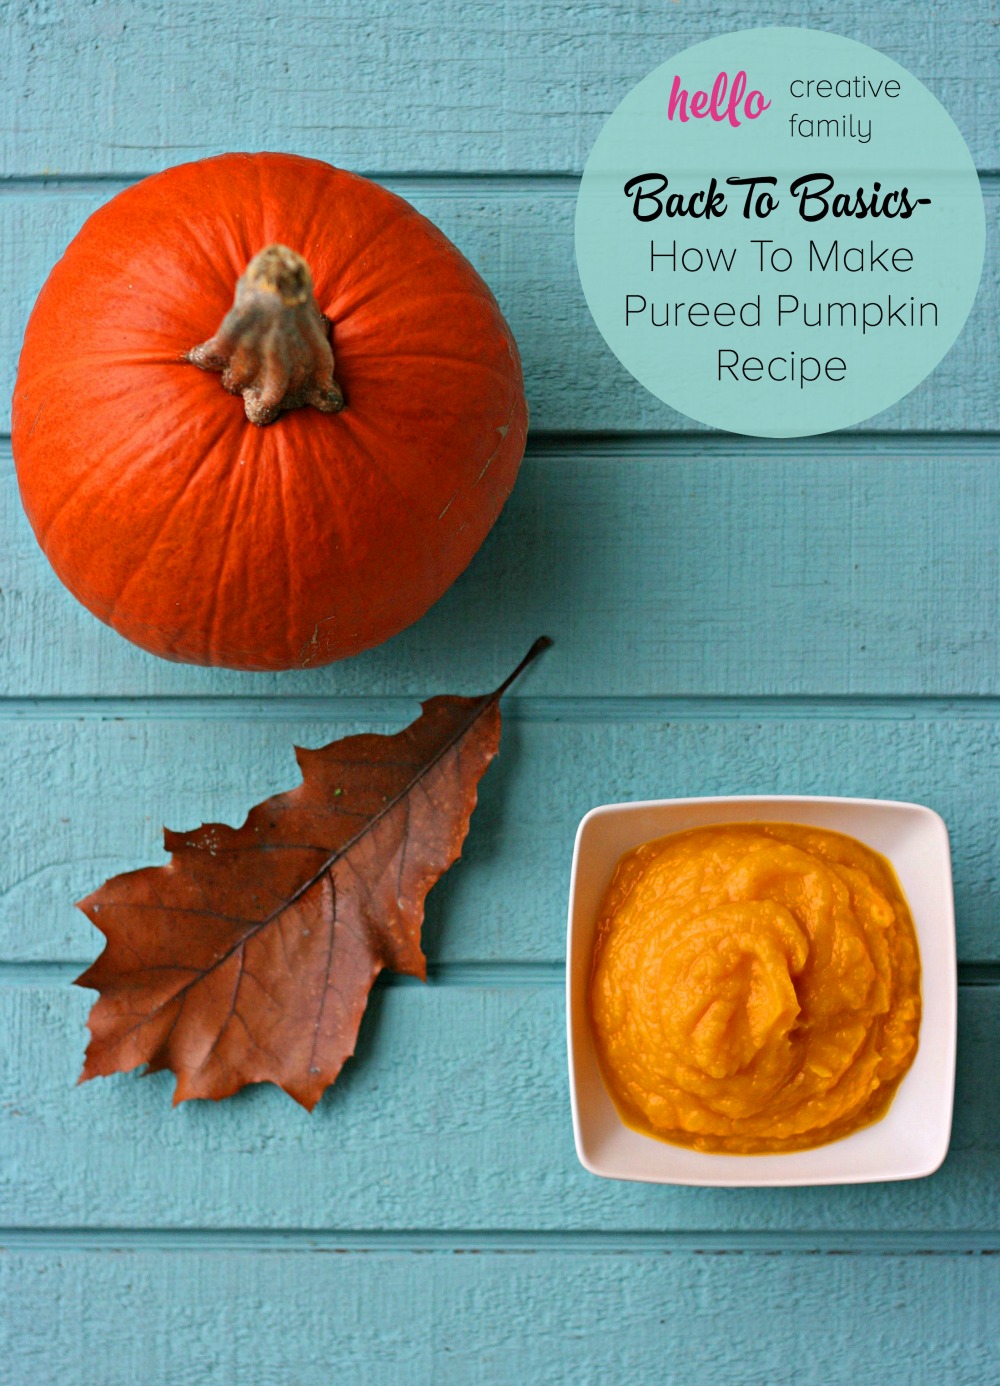 In another fabulous Back To Basics article, Hello Creative Family shares how to roast a pumpkin and make homemade pumpkin puree! Fill your freezer!